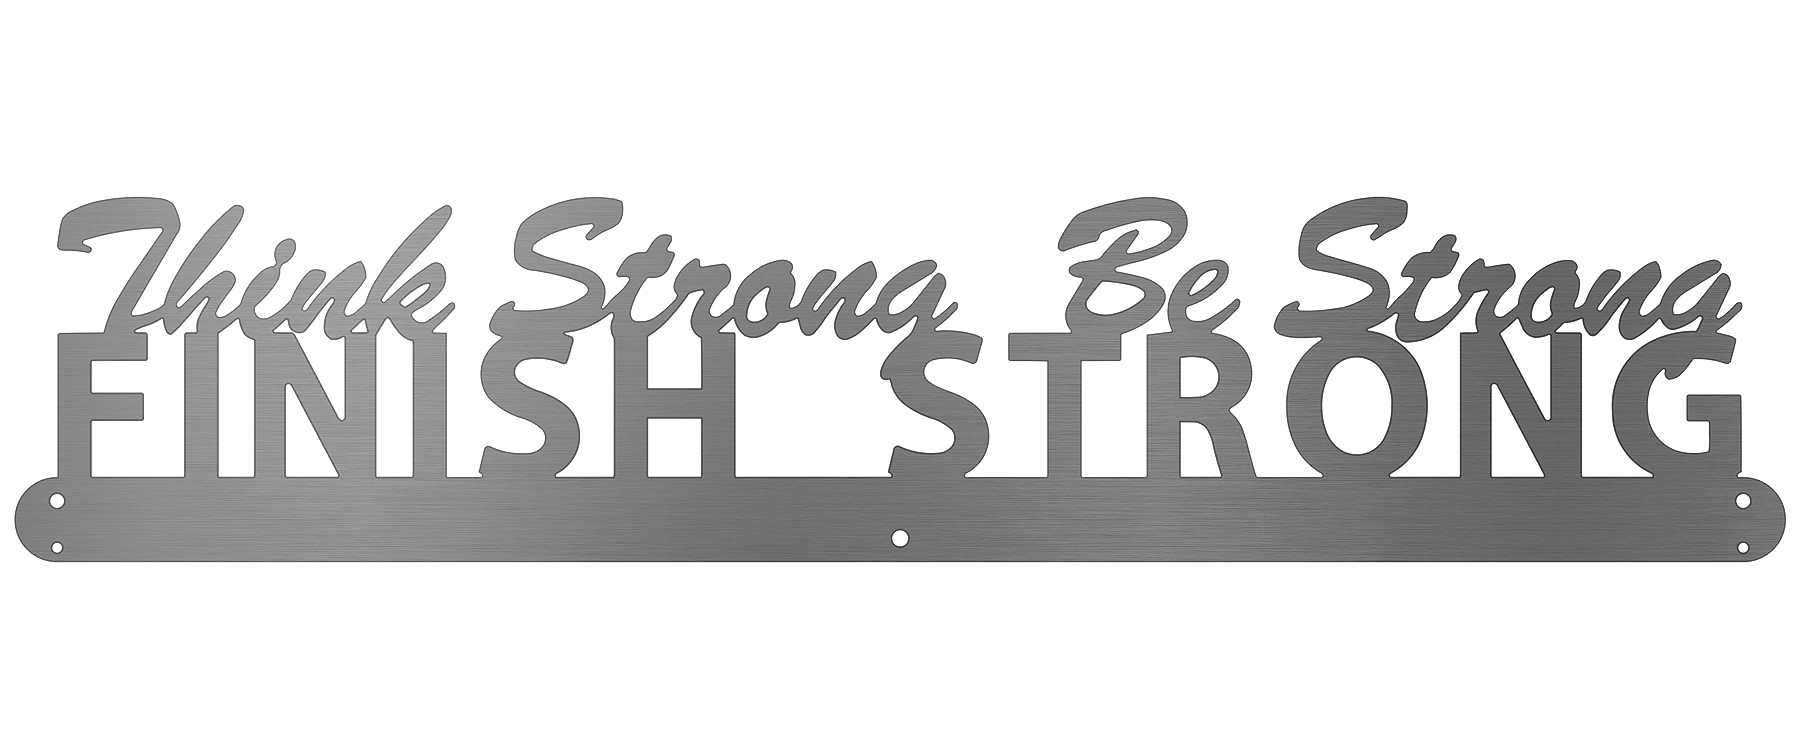 Think Strong, Be Strong, Finish Strong Belt Display